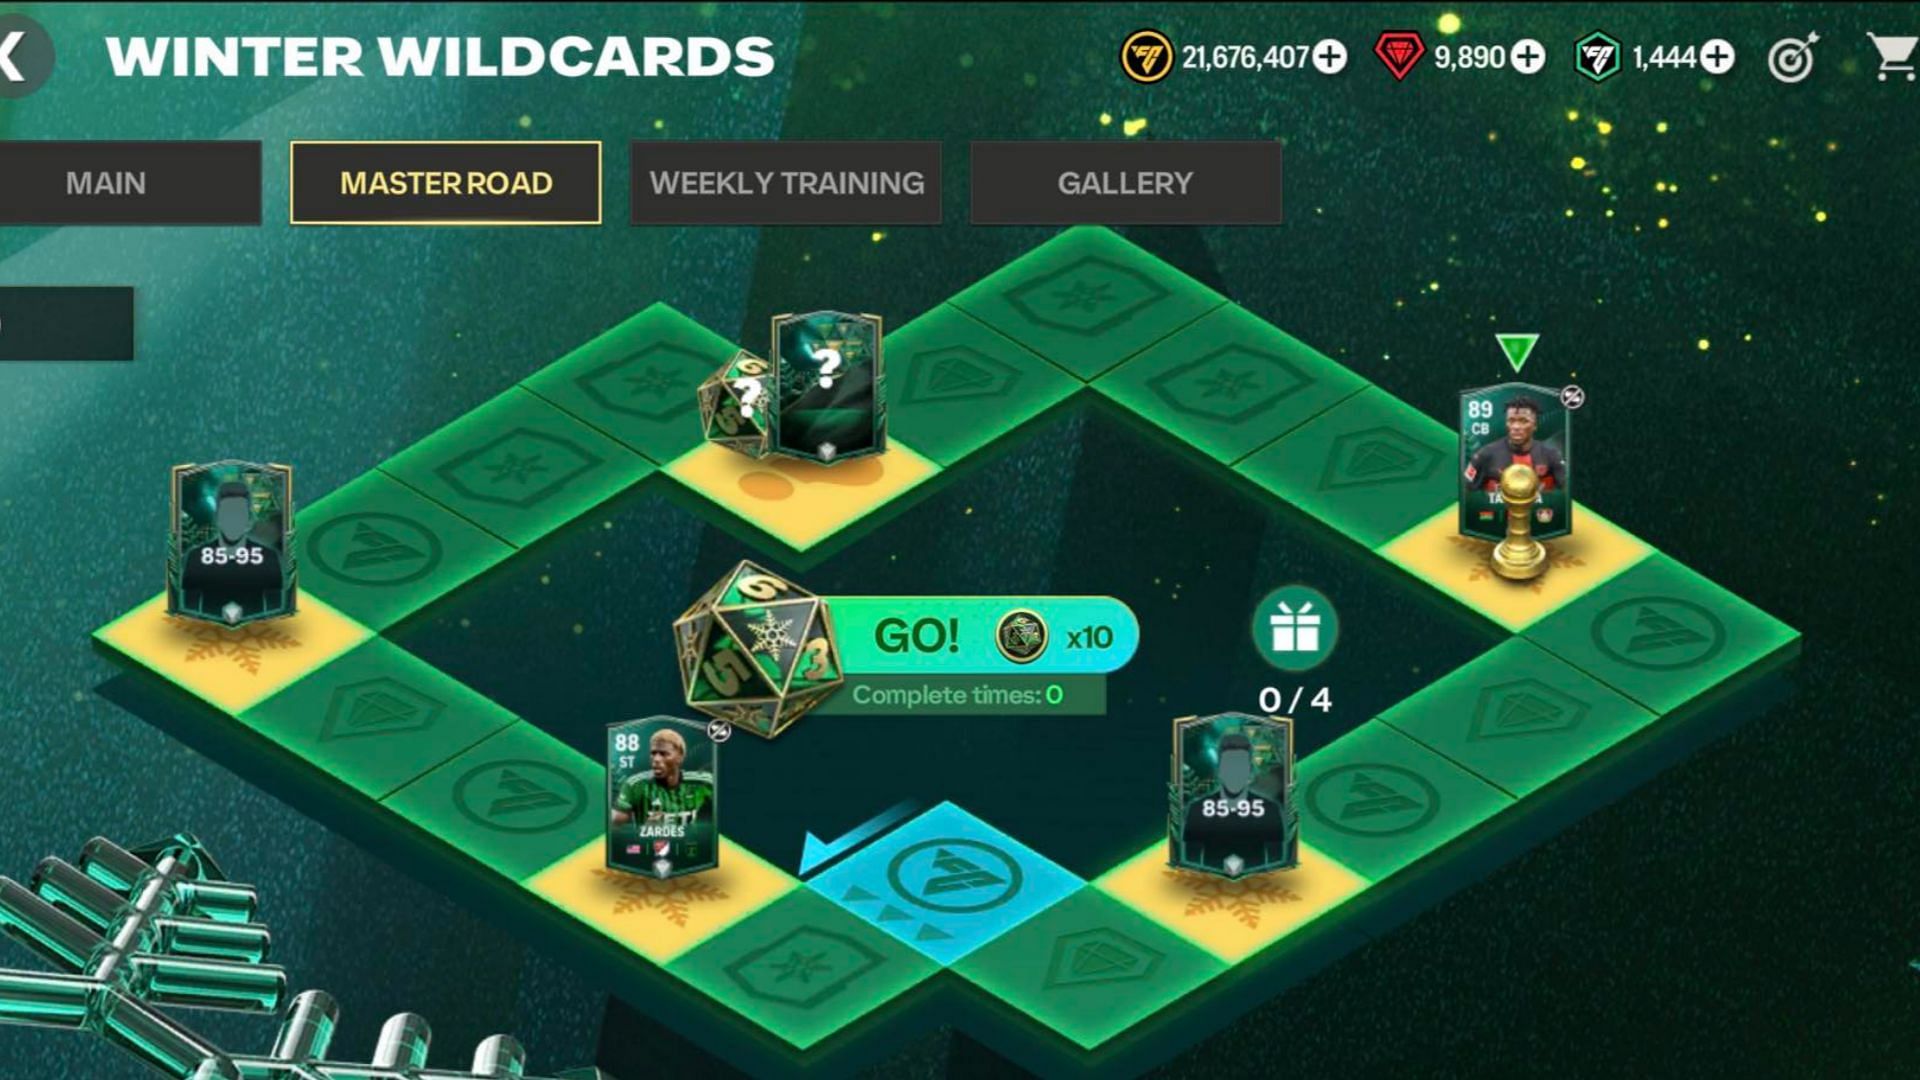 Master Road Chapter in FC Mobile (Image via EA Sports)